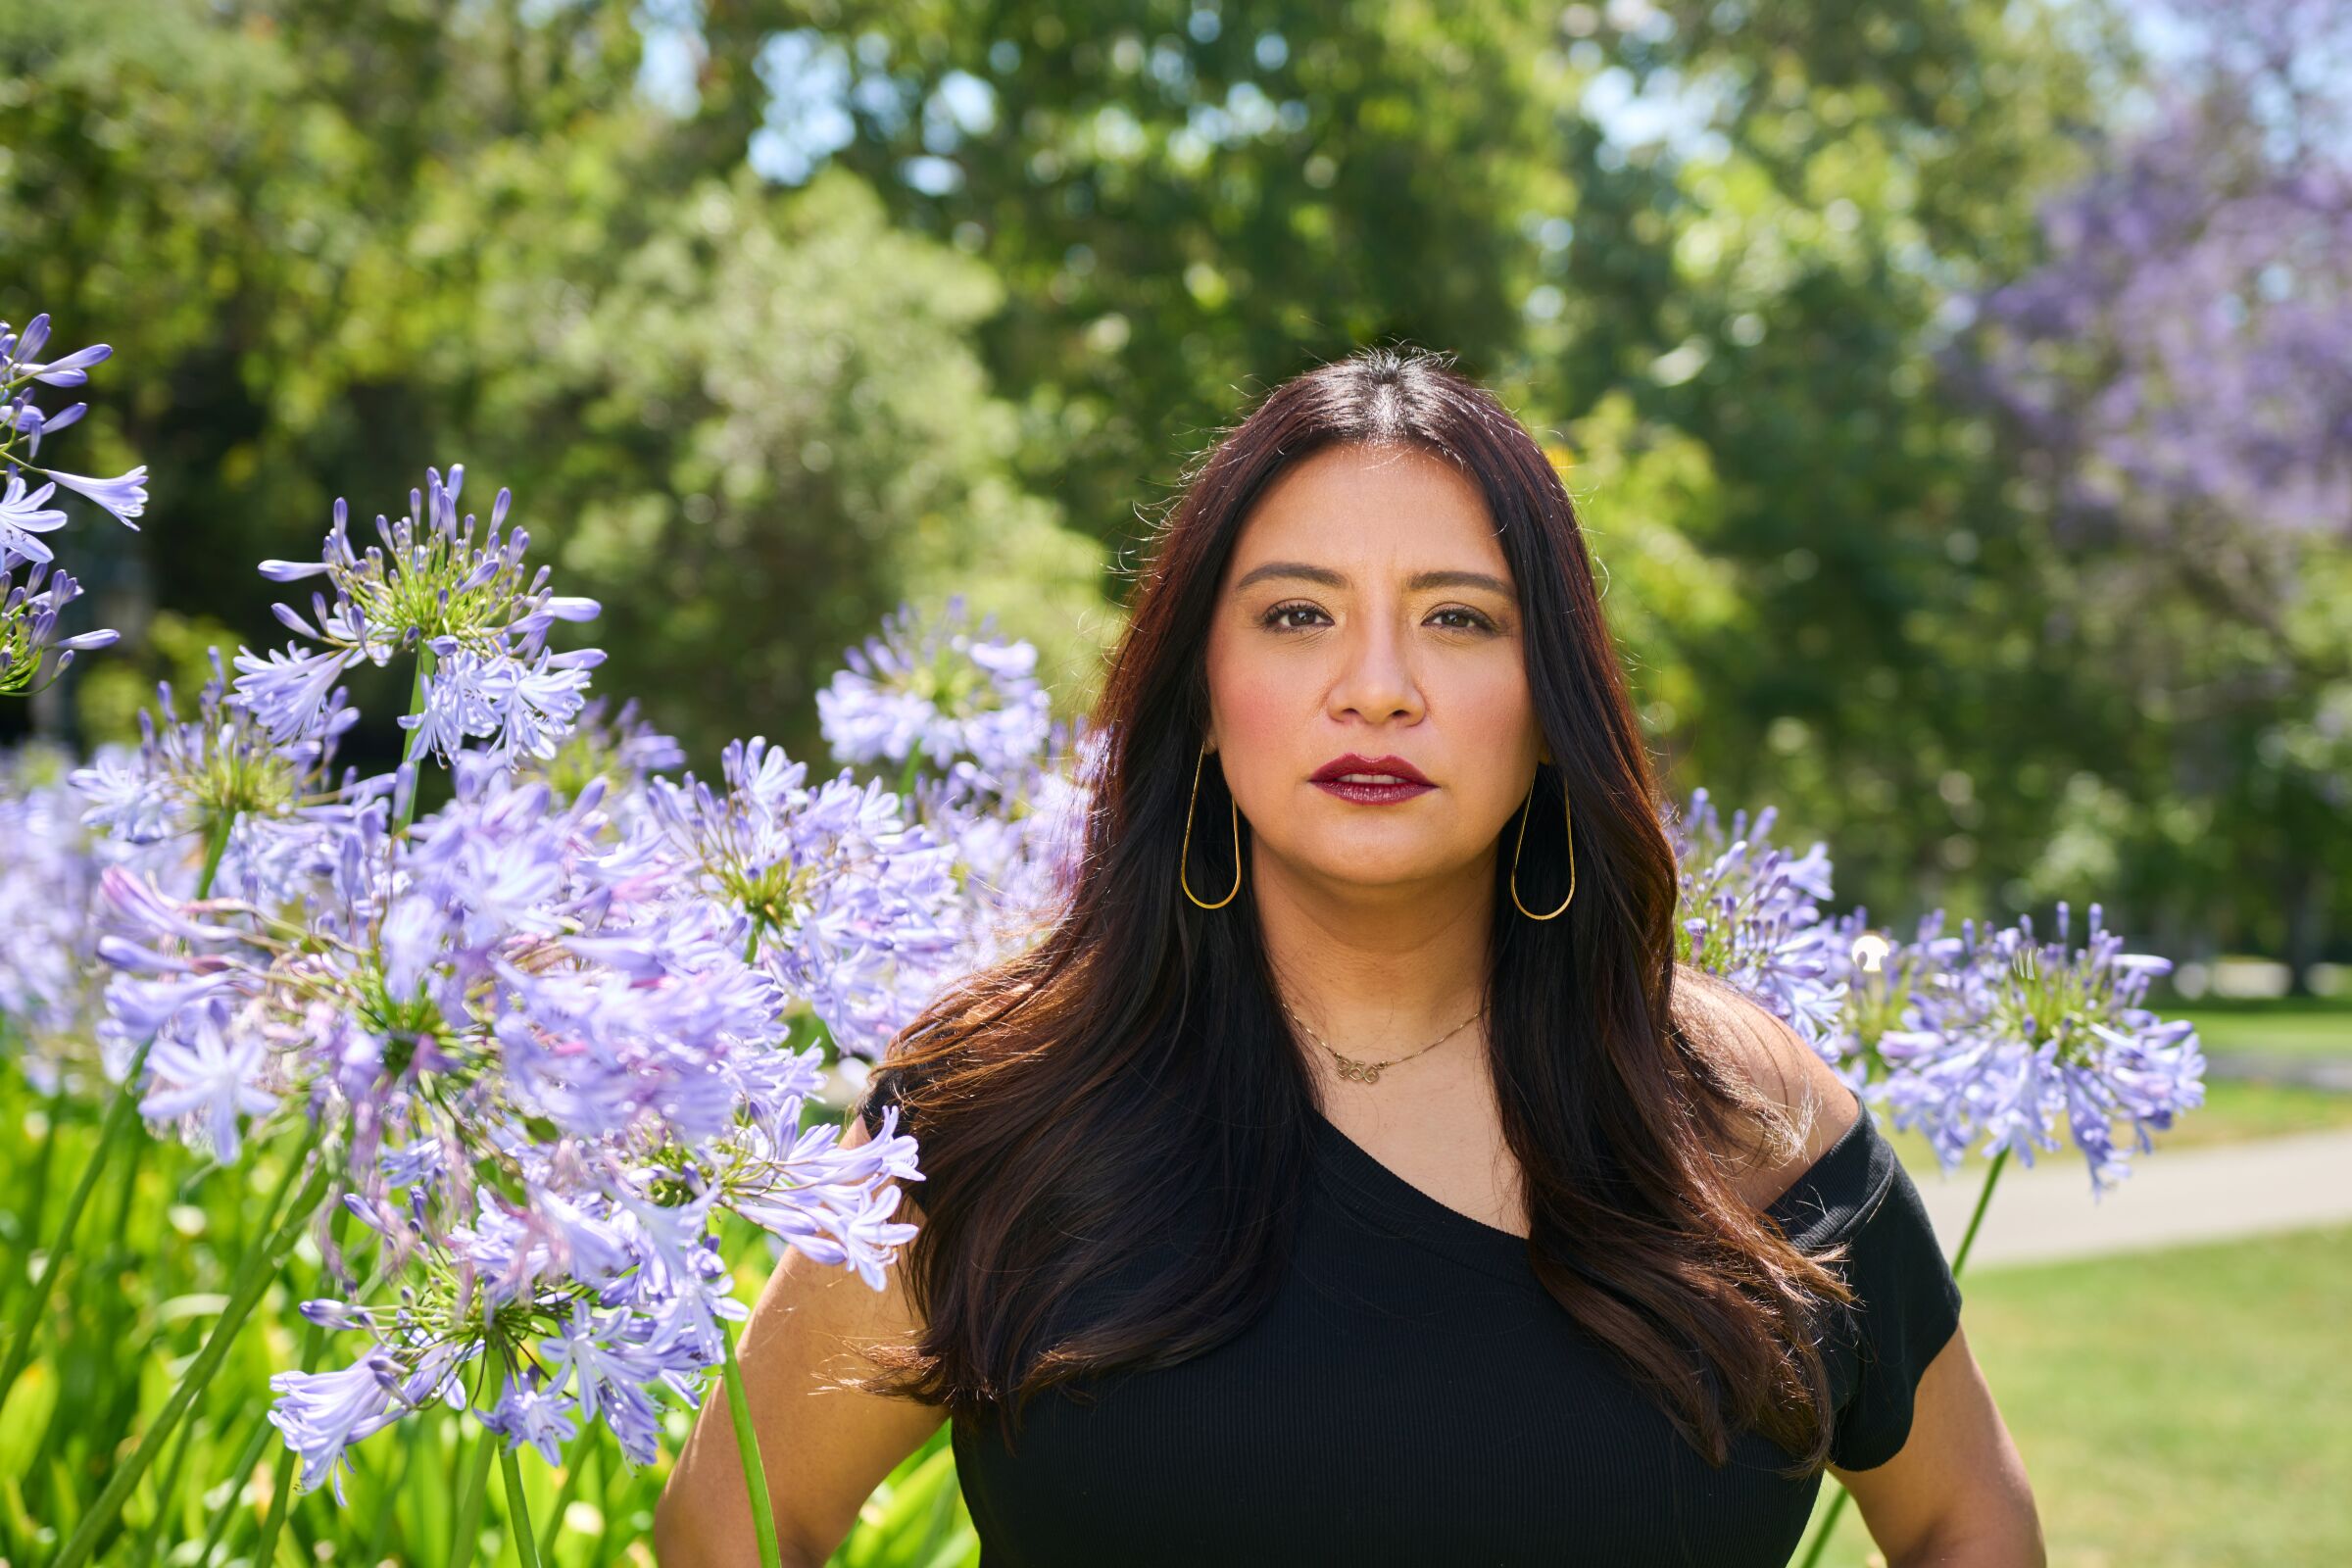 A portrait of comedian Cristela Alonzo surrounded by flowers in a park.